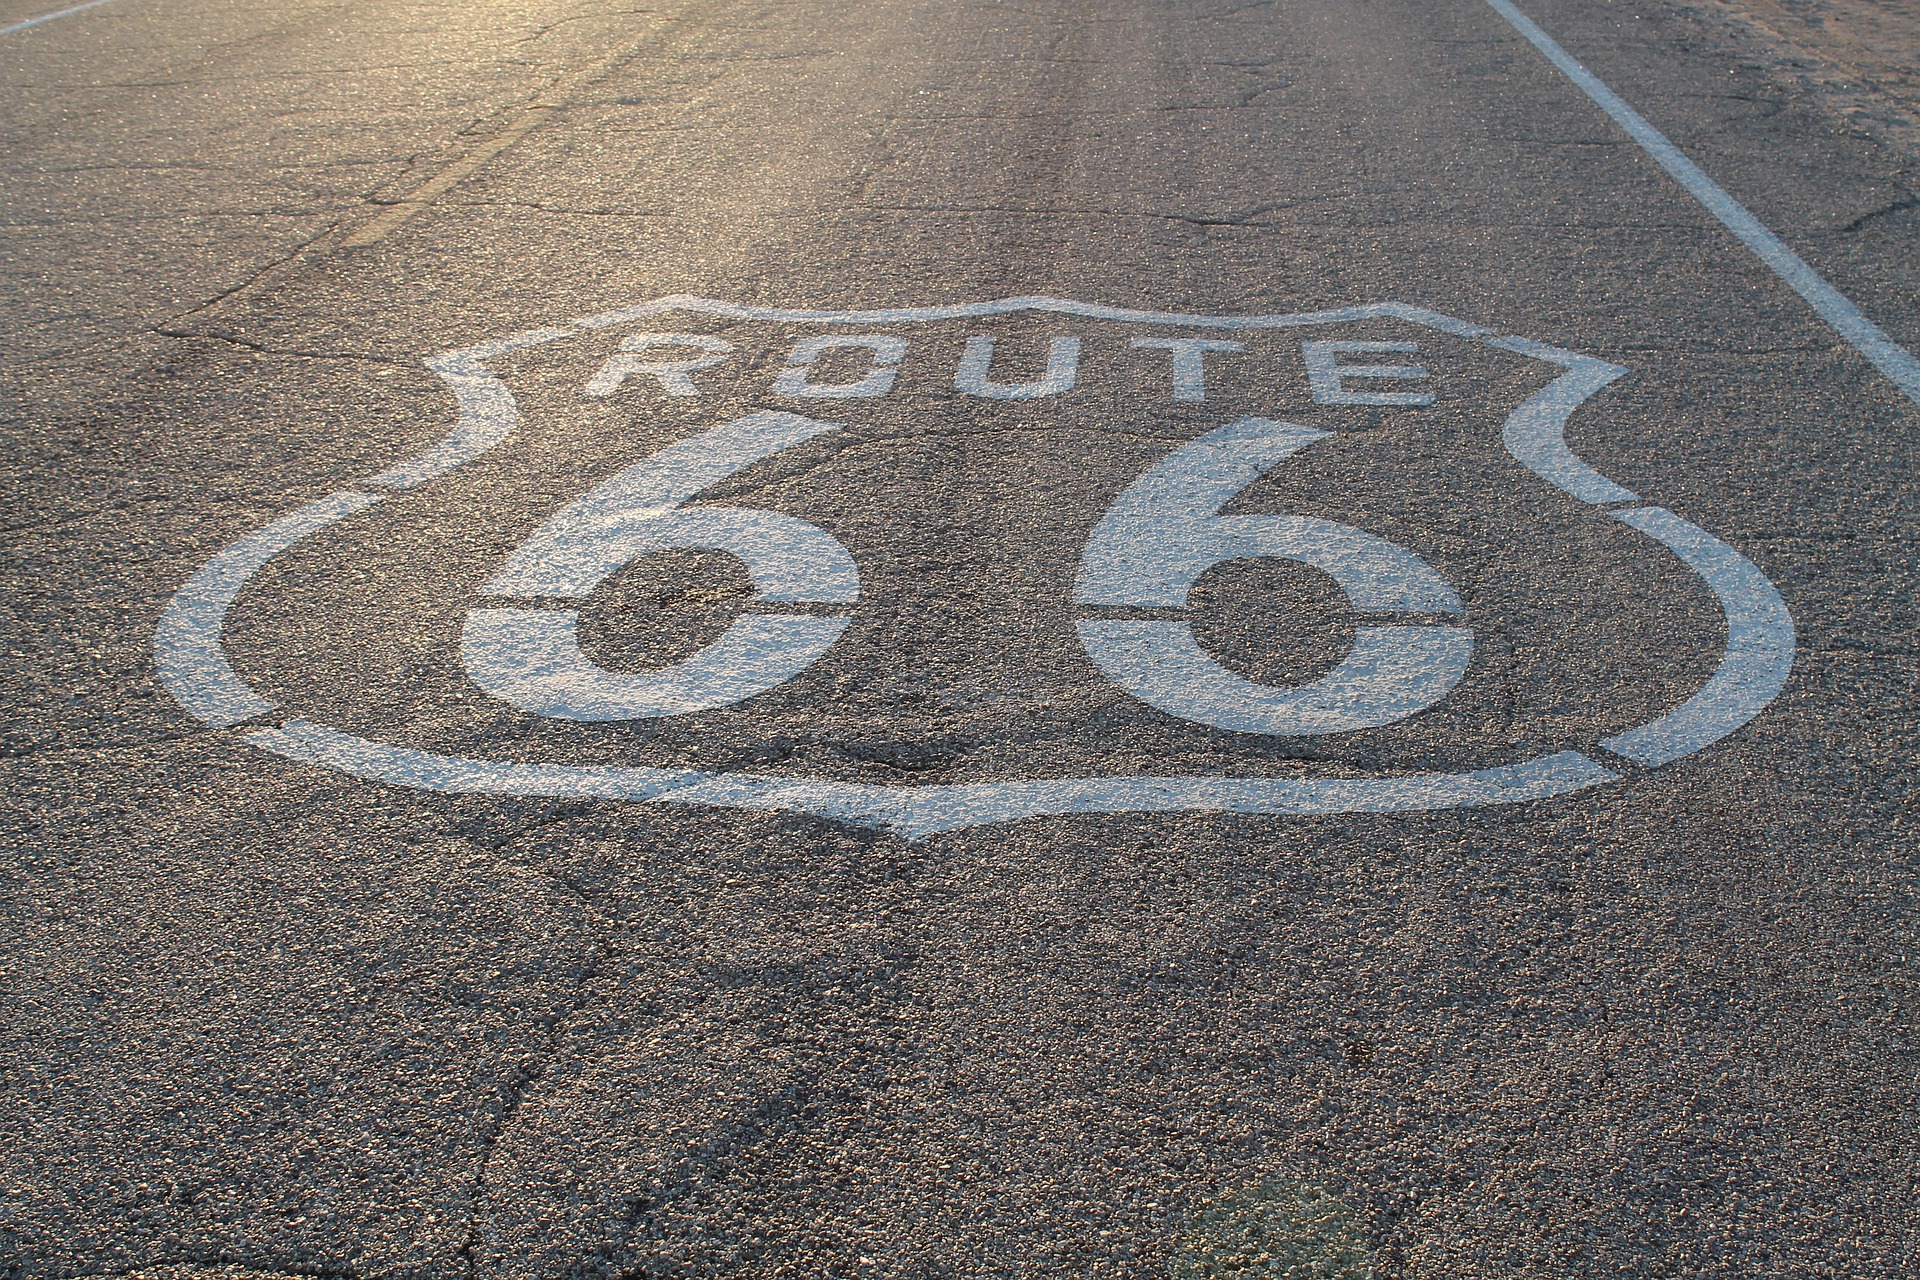 U.S. Route 66 emblem painted on road surface, representing Inland Empire, California.